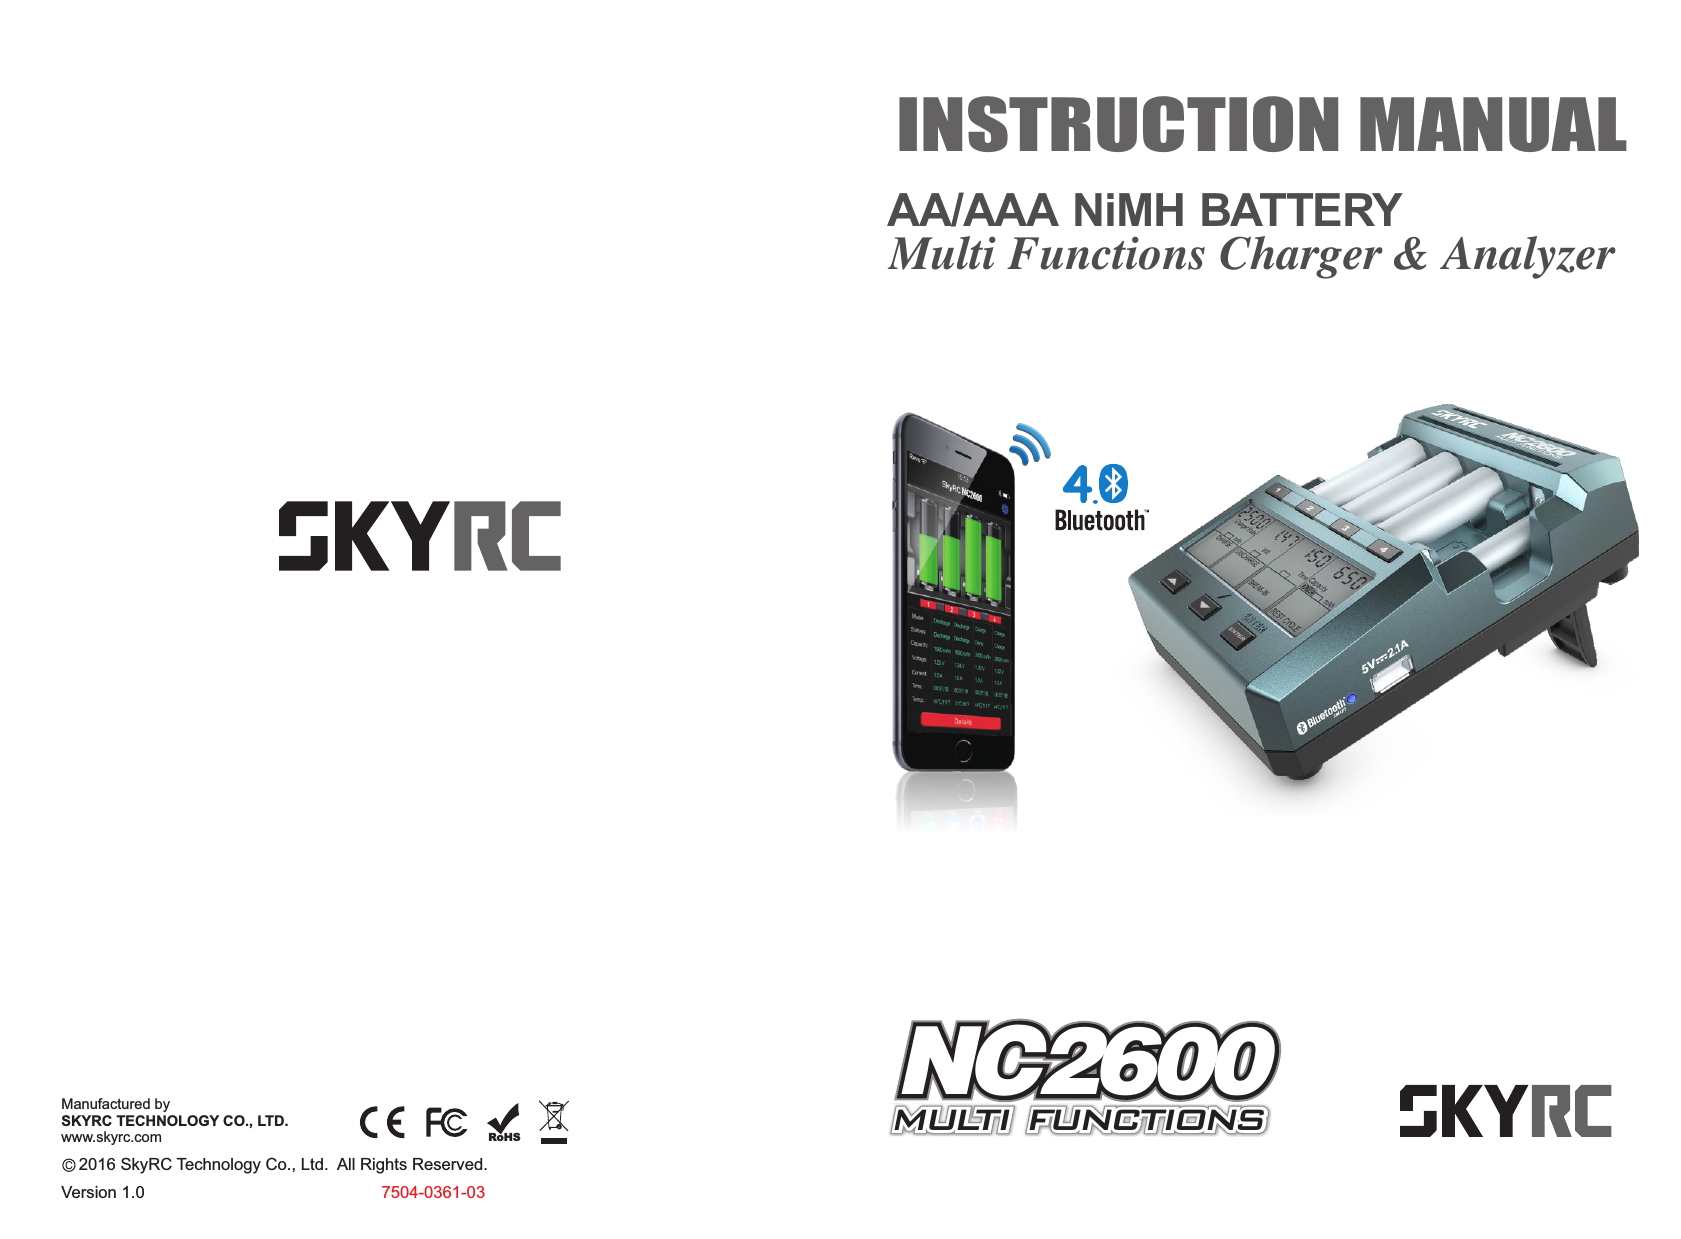     2016 SkyRC Technology Co., Ltd.  All Rights Reserved. Manufactured bySKYRC TECHNOLOGY CO., LTD.www.skyrc.comINSTRUCTION MANUALVersion 1.0 7504-0361-03RoHSAA/AAANiMH BATTERYMulti Functions Charger &amp; AnalyzerNC2600multi functions